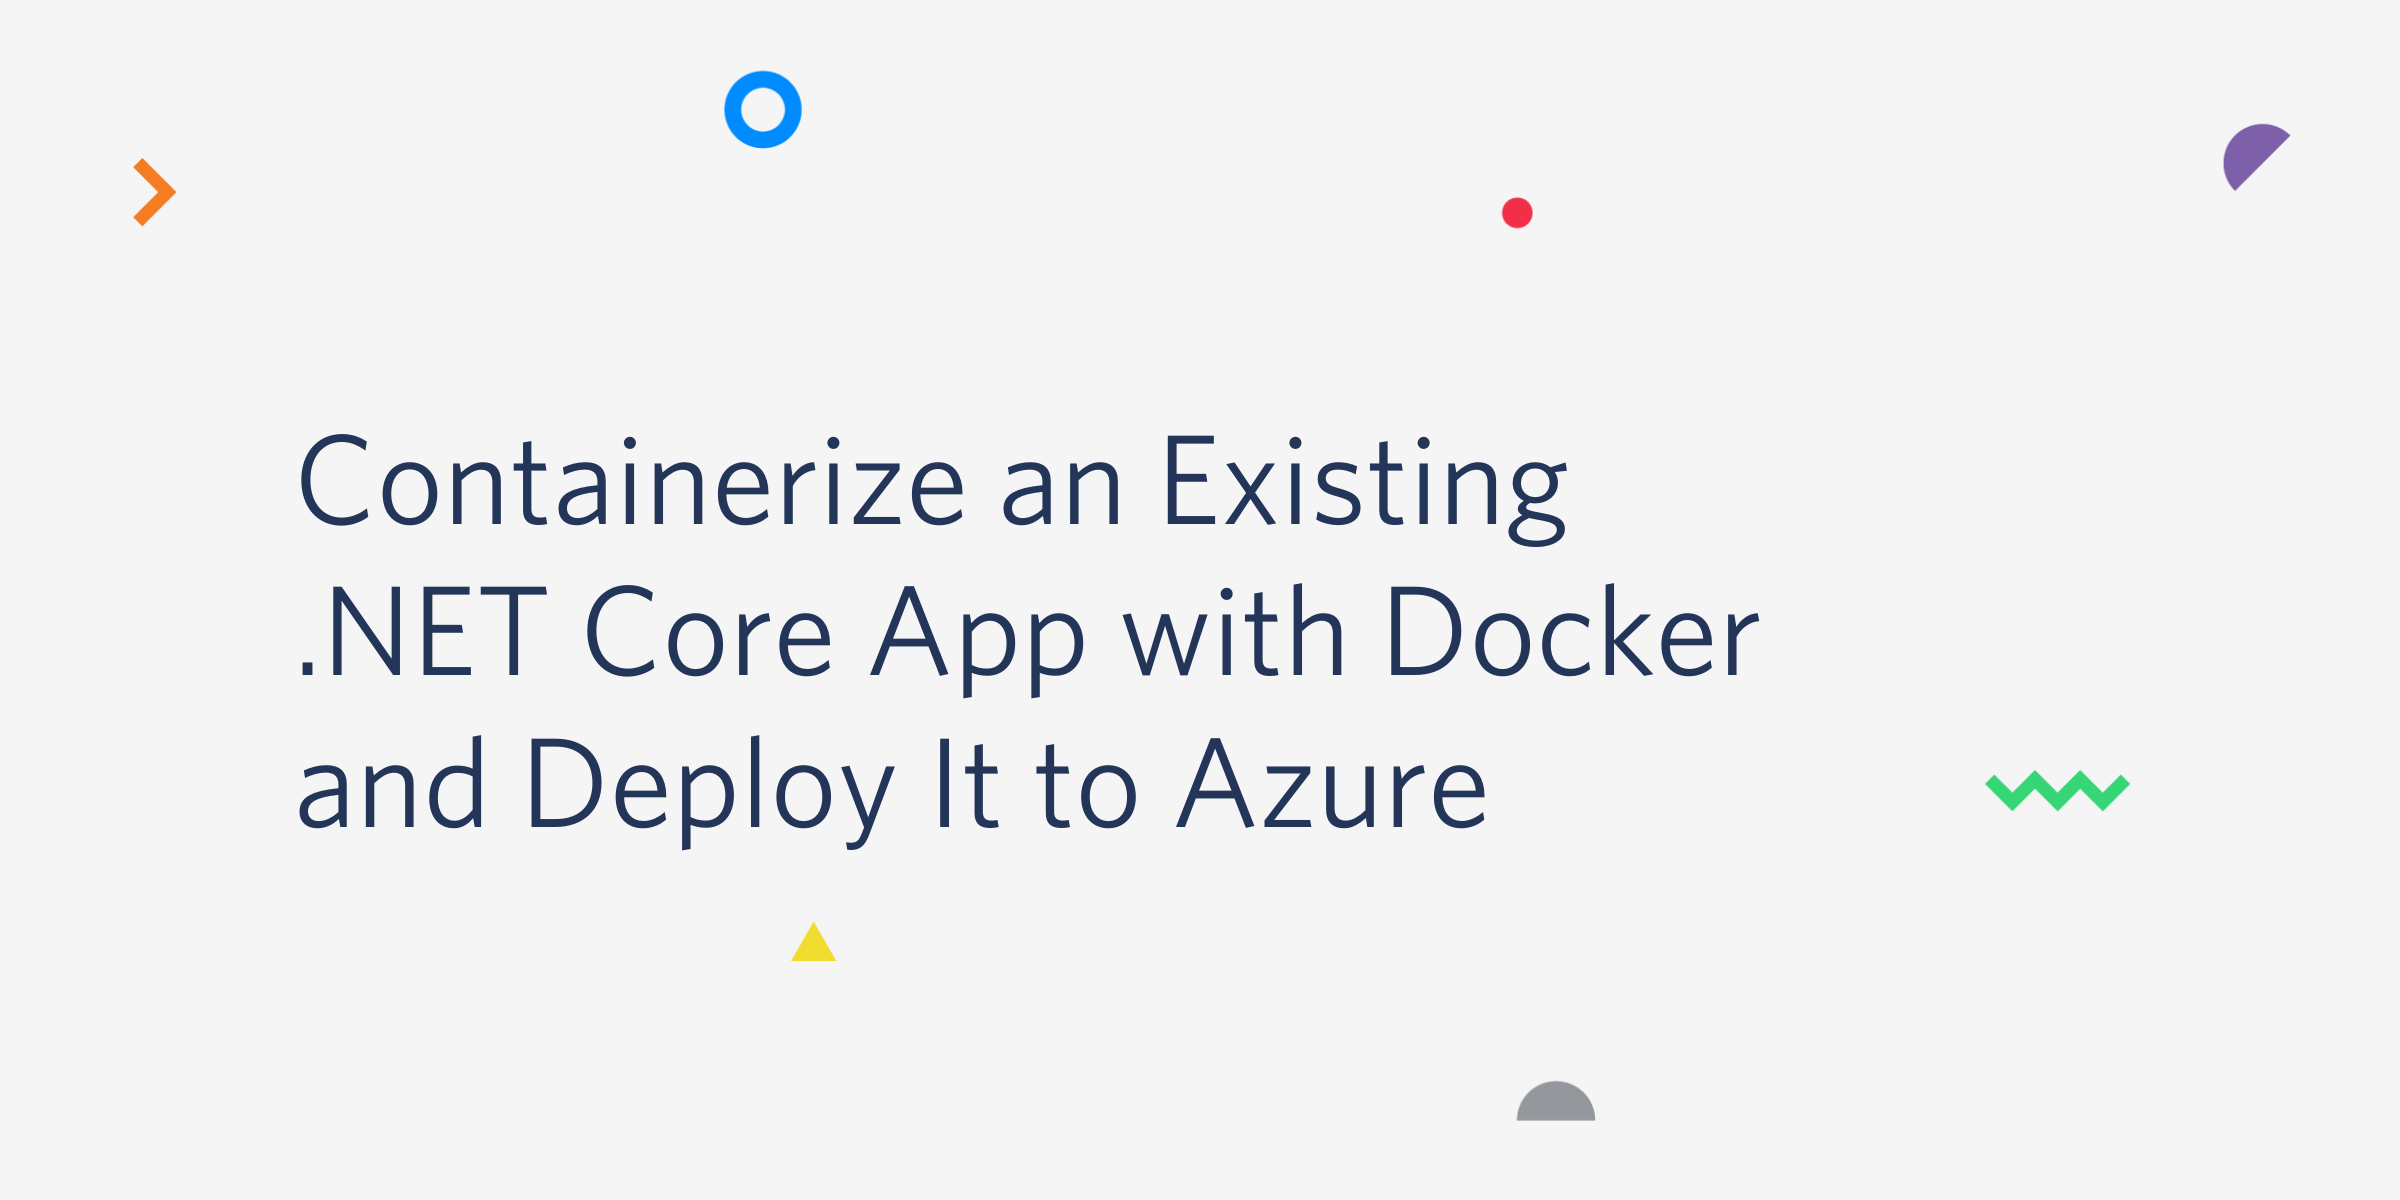 containerize-existing-dot-net-docker-azure.png